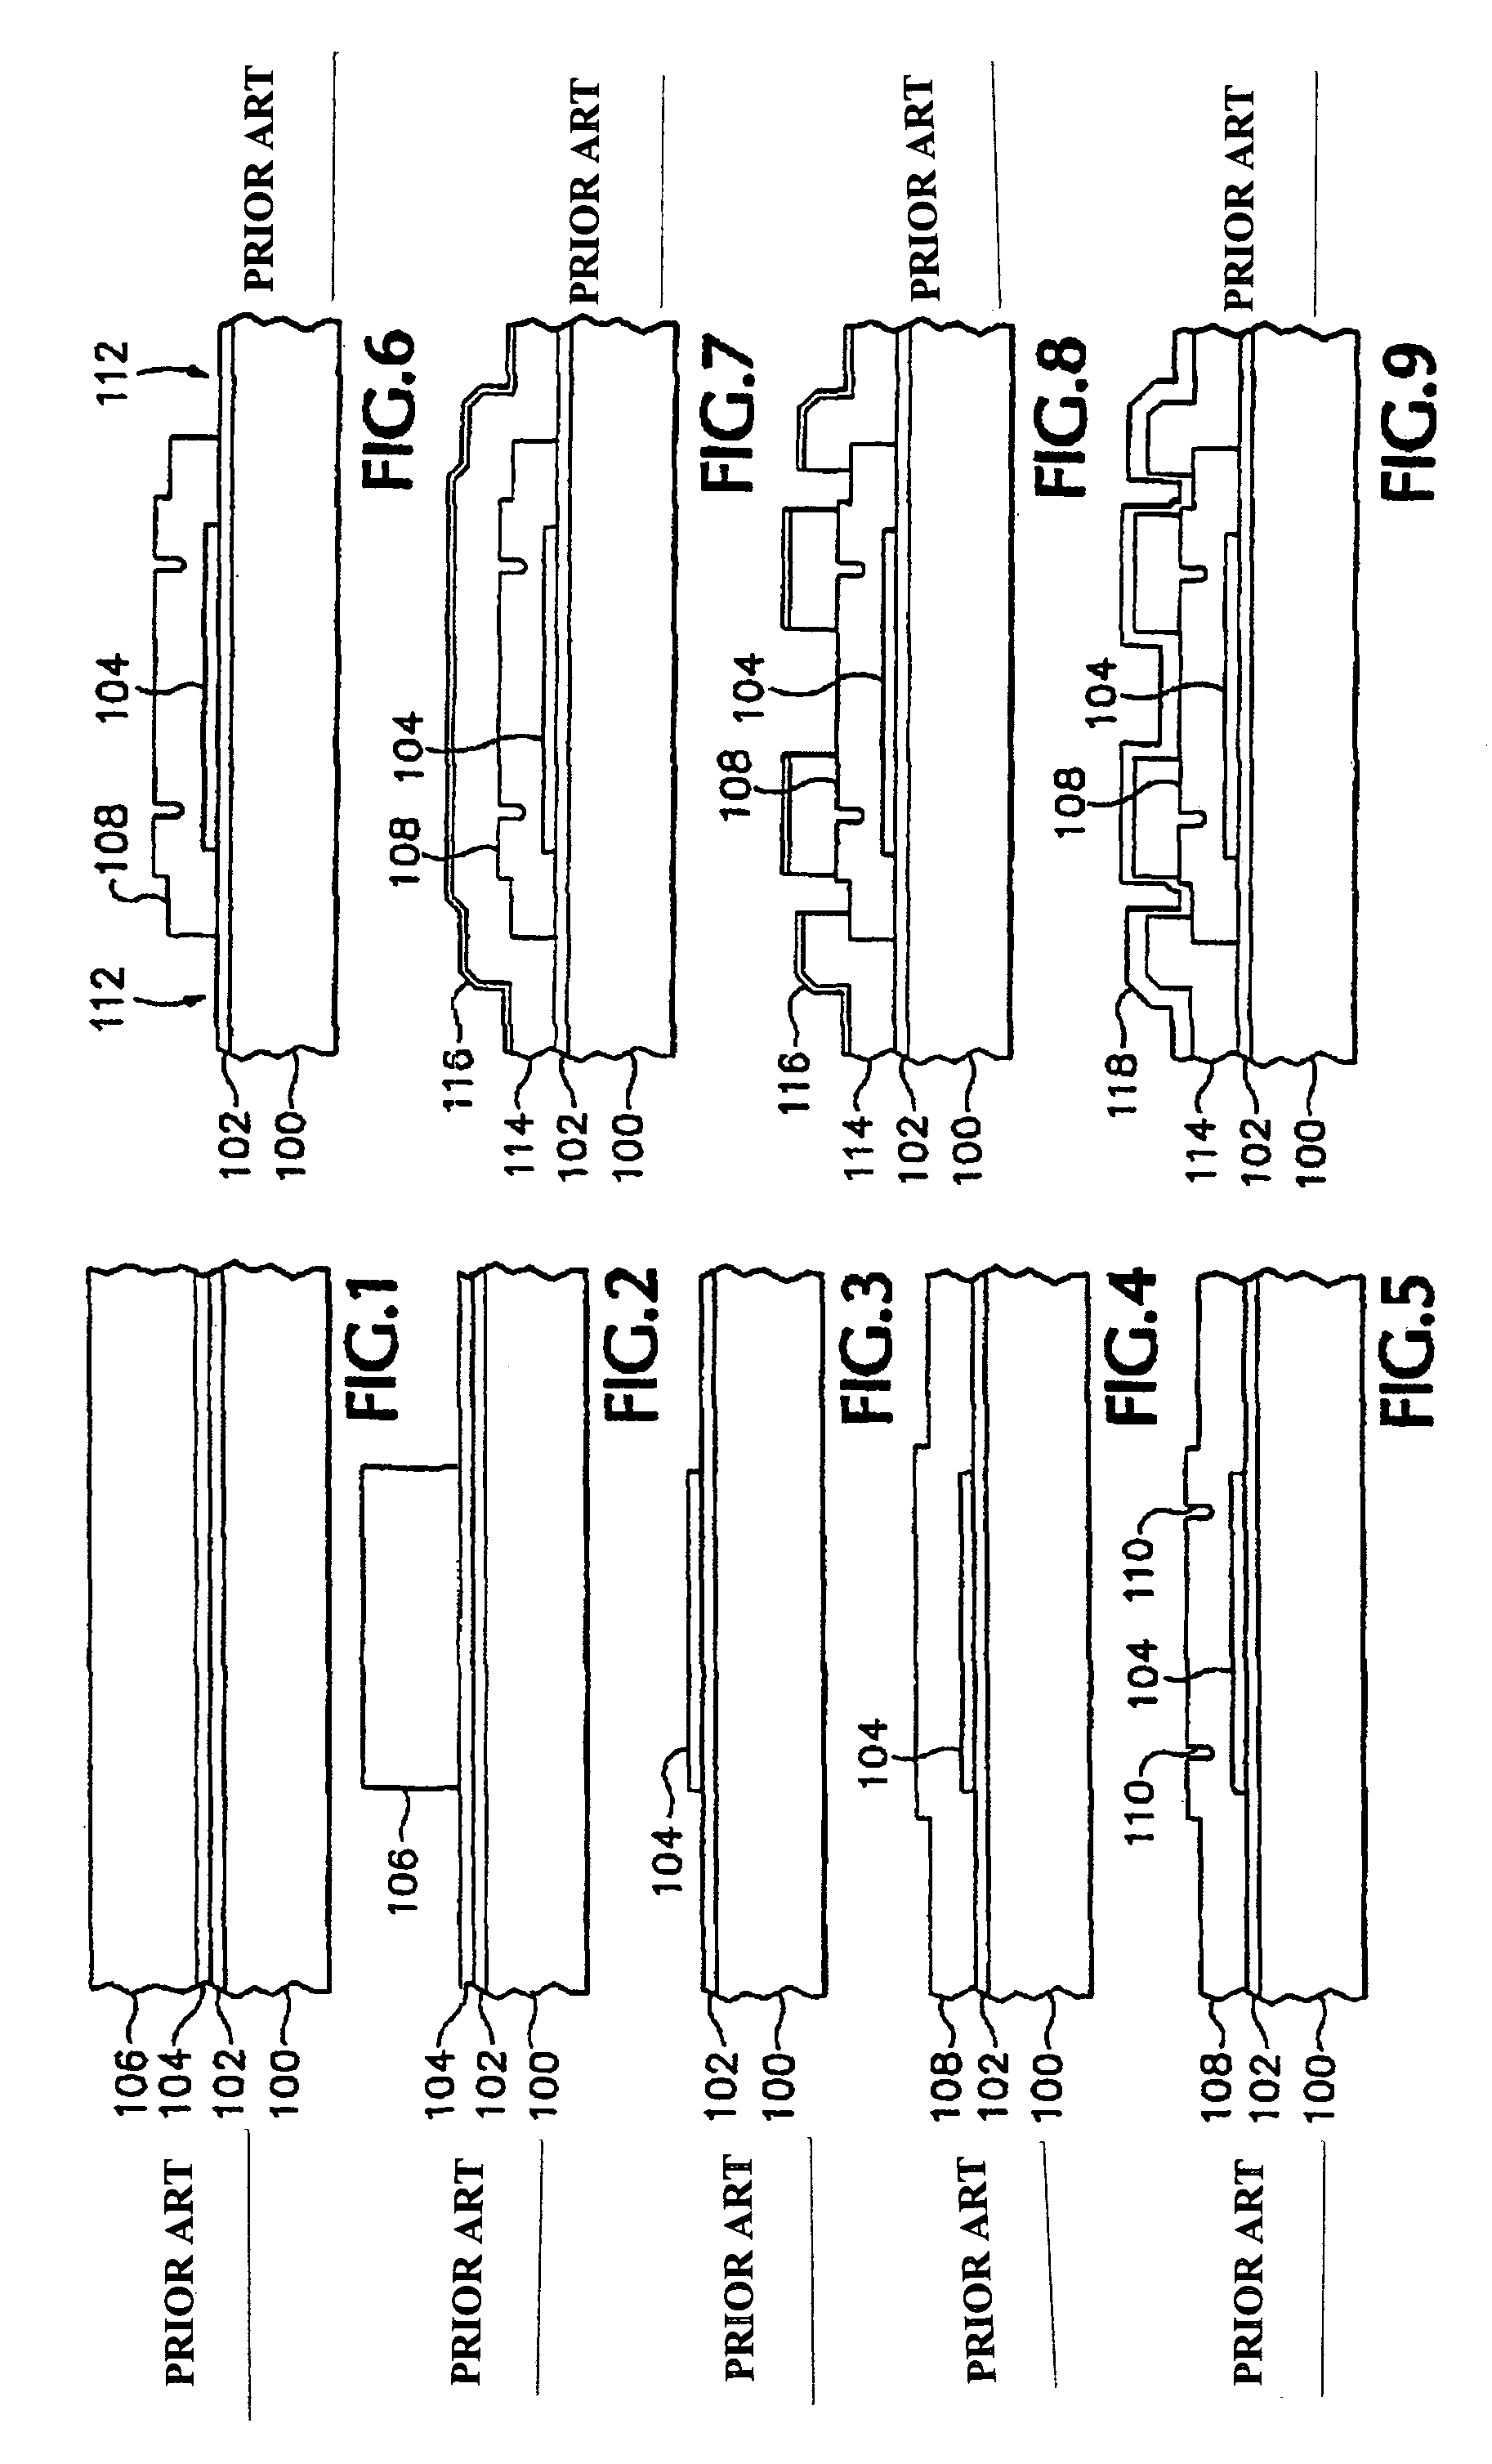 Magnetically actuated microelectrochemical systems actuator